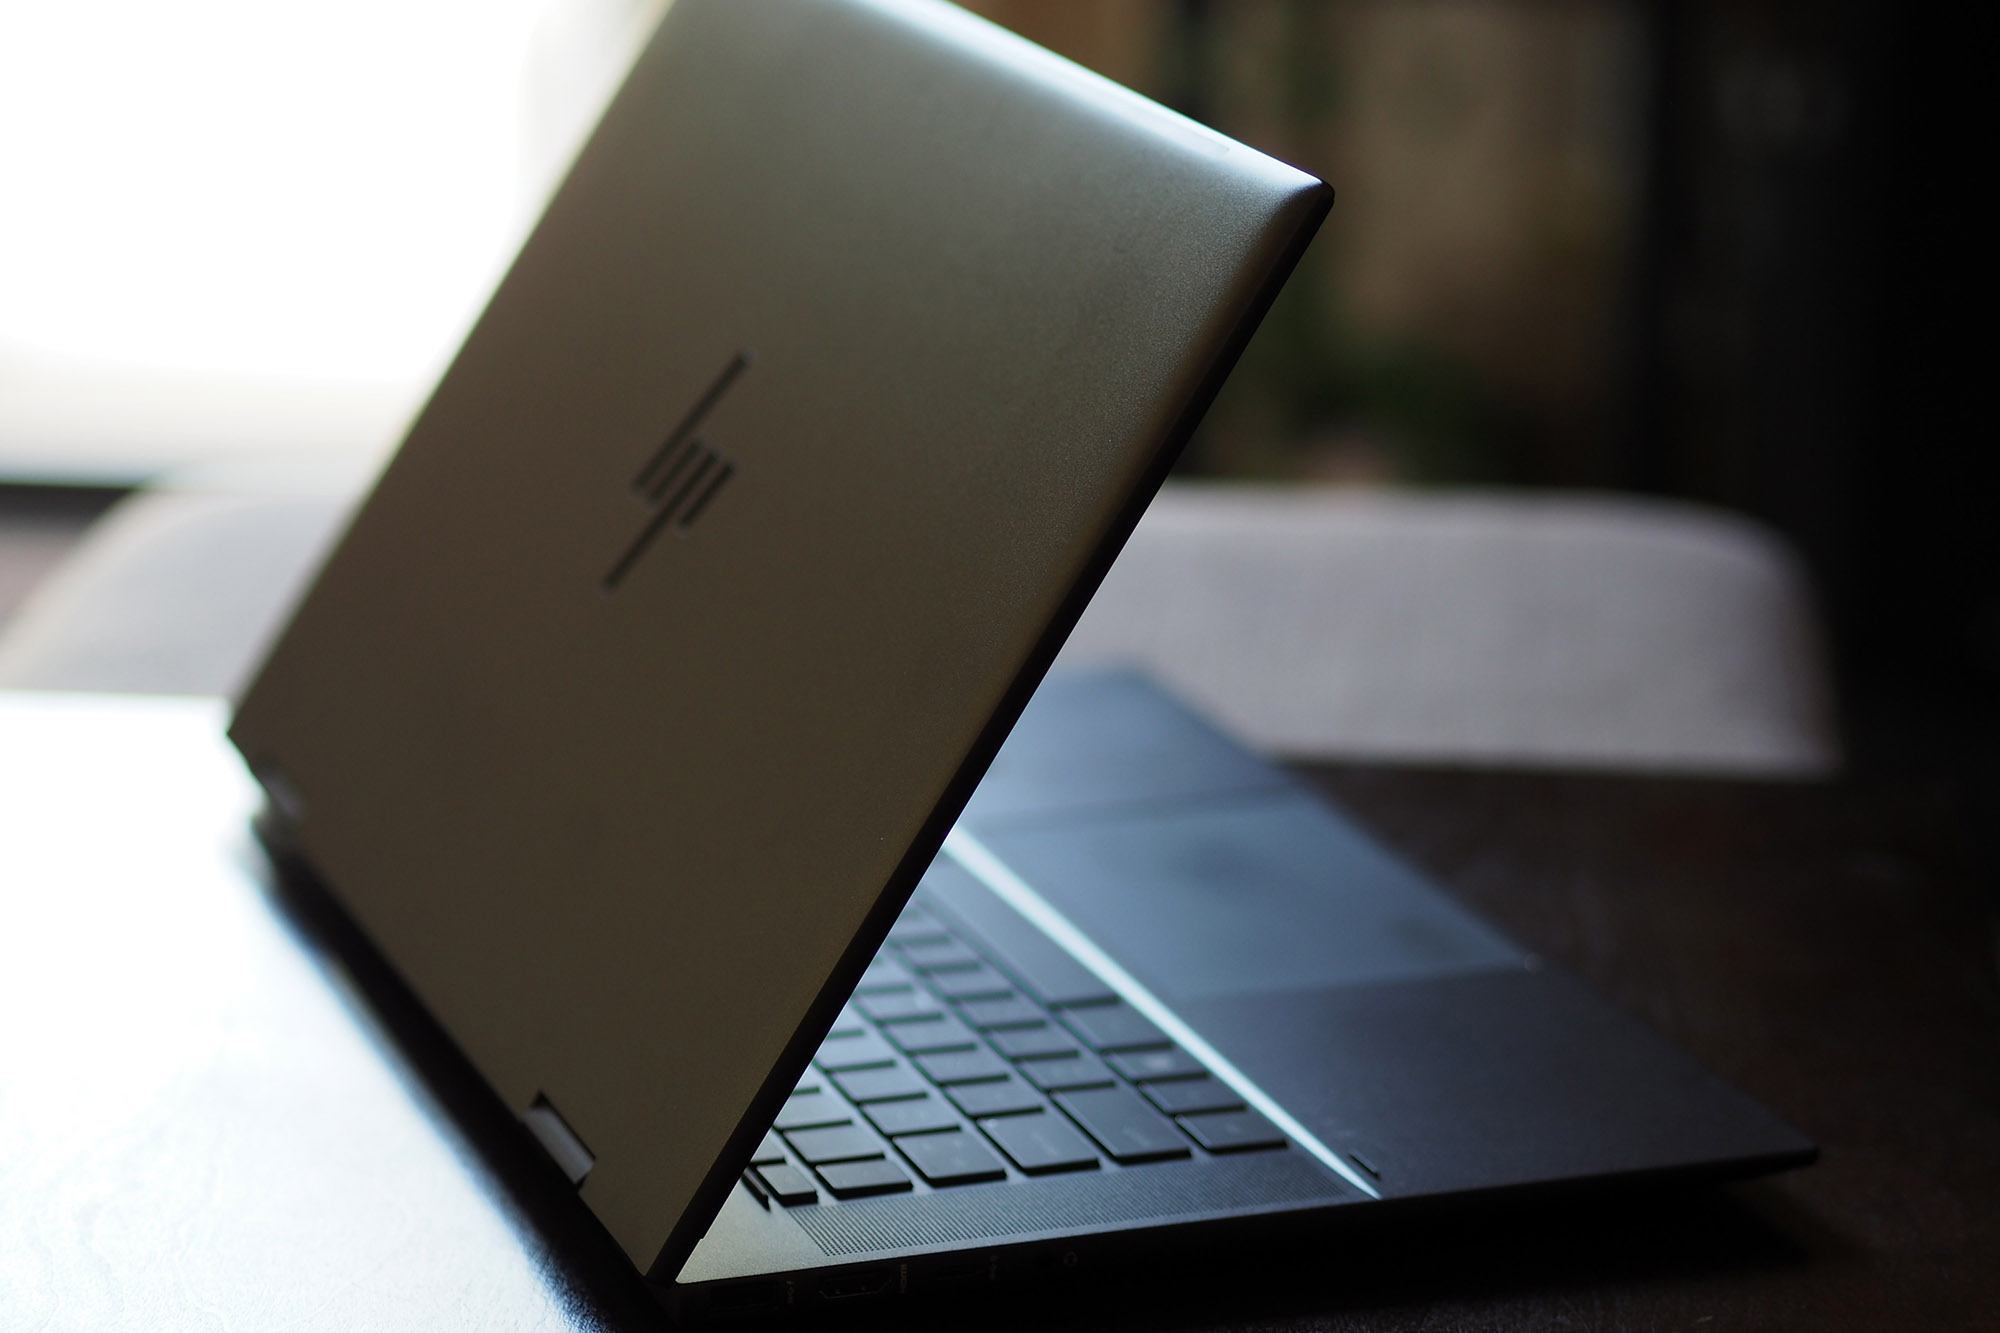 HP Envy x360 13 review: An affordable 2-in-1 laptop with stylus